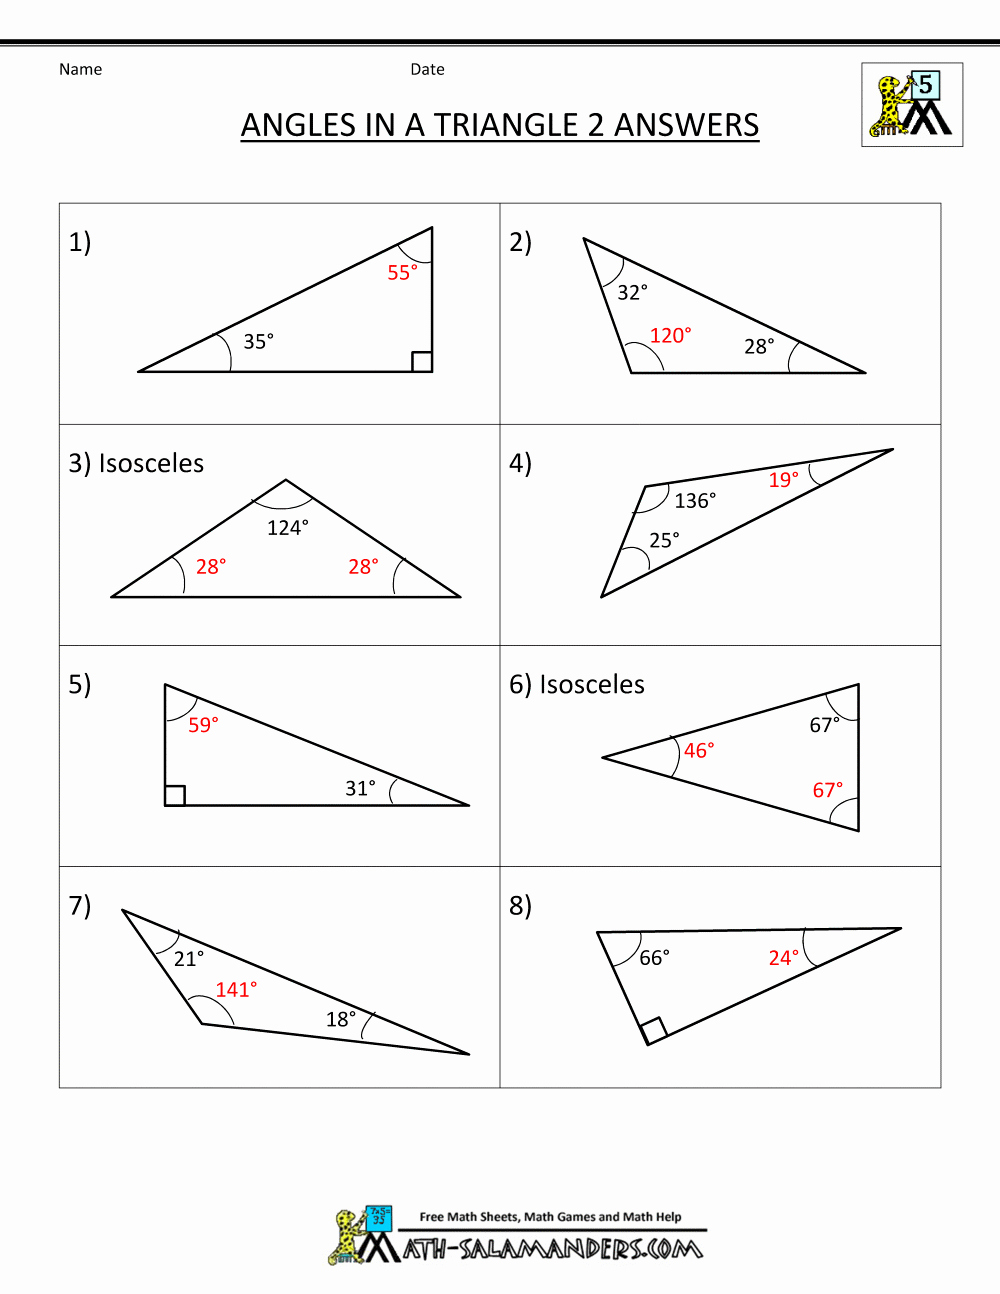 Triangle Interior Angles Worksheet Answers Elegant Math Worksheets for Fifth Graders Angles In A Triangle